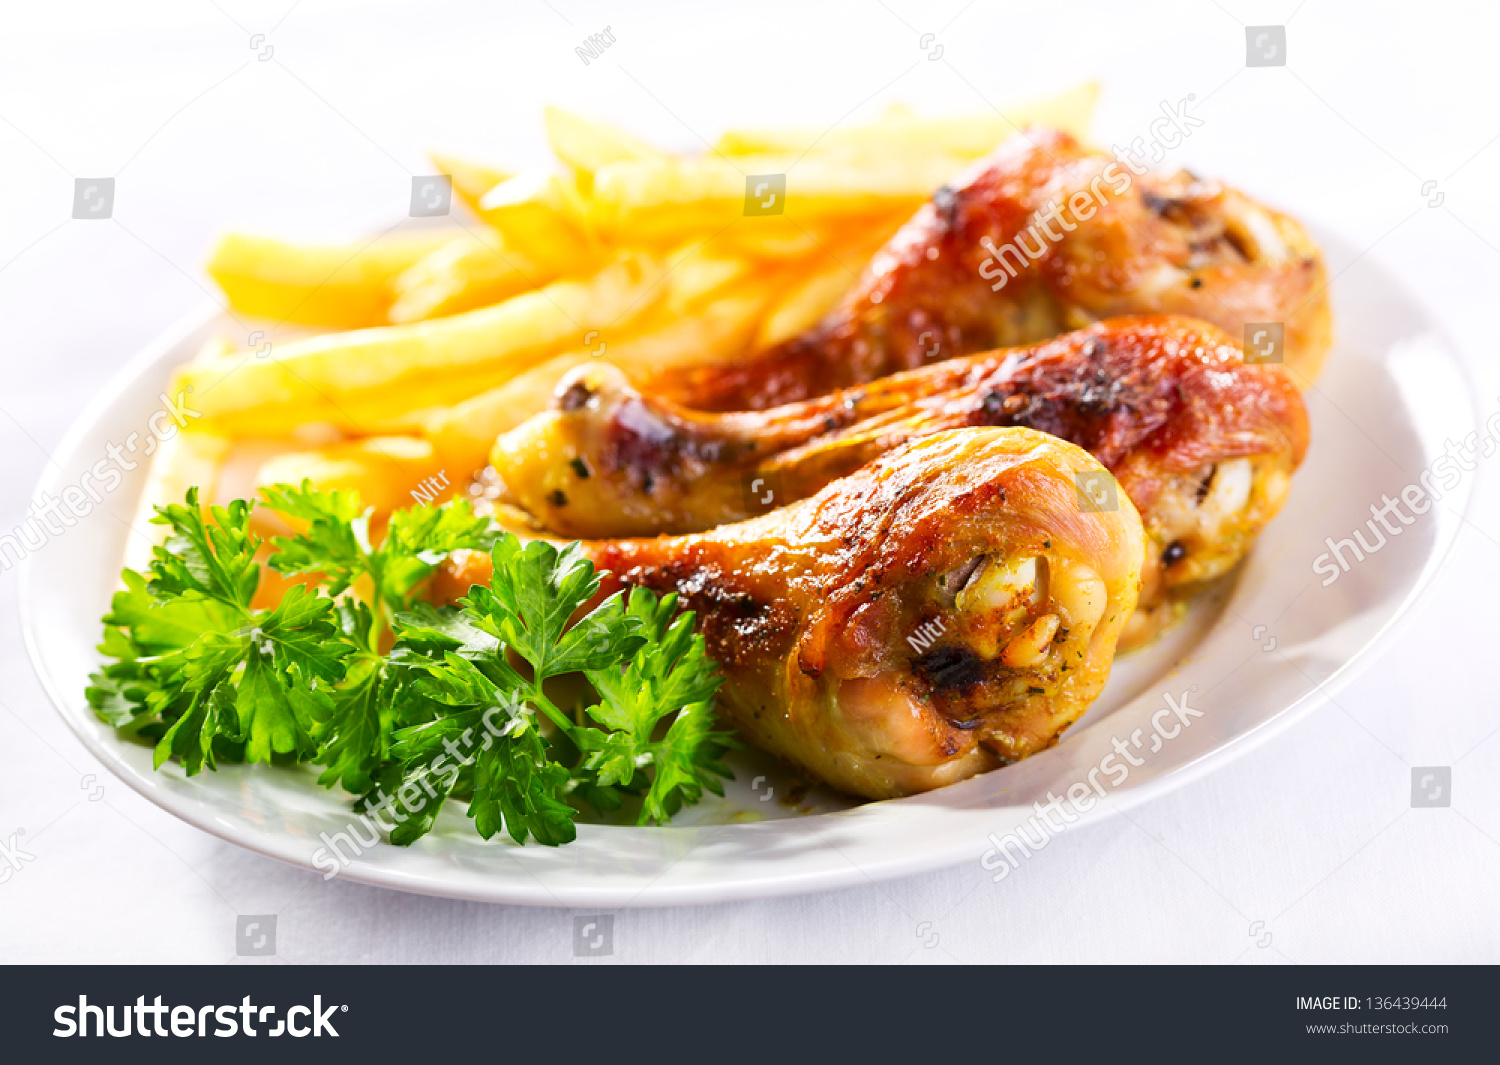 Plate Grilled Chicken Legs Fries Stock Photo 136439444 - Shutterstock